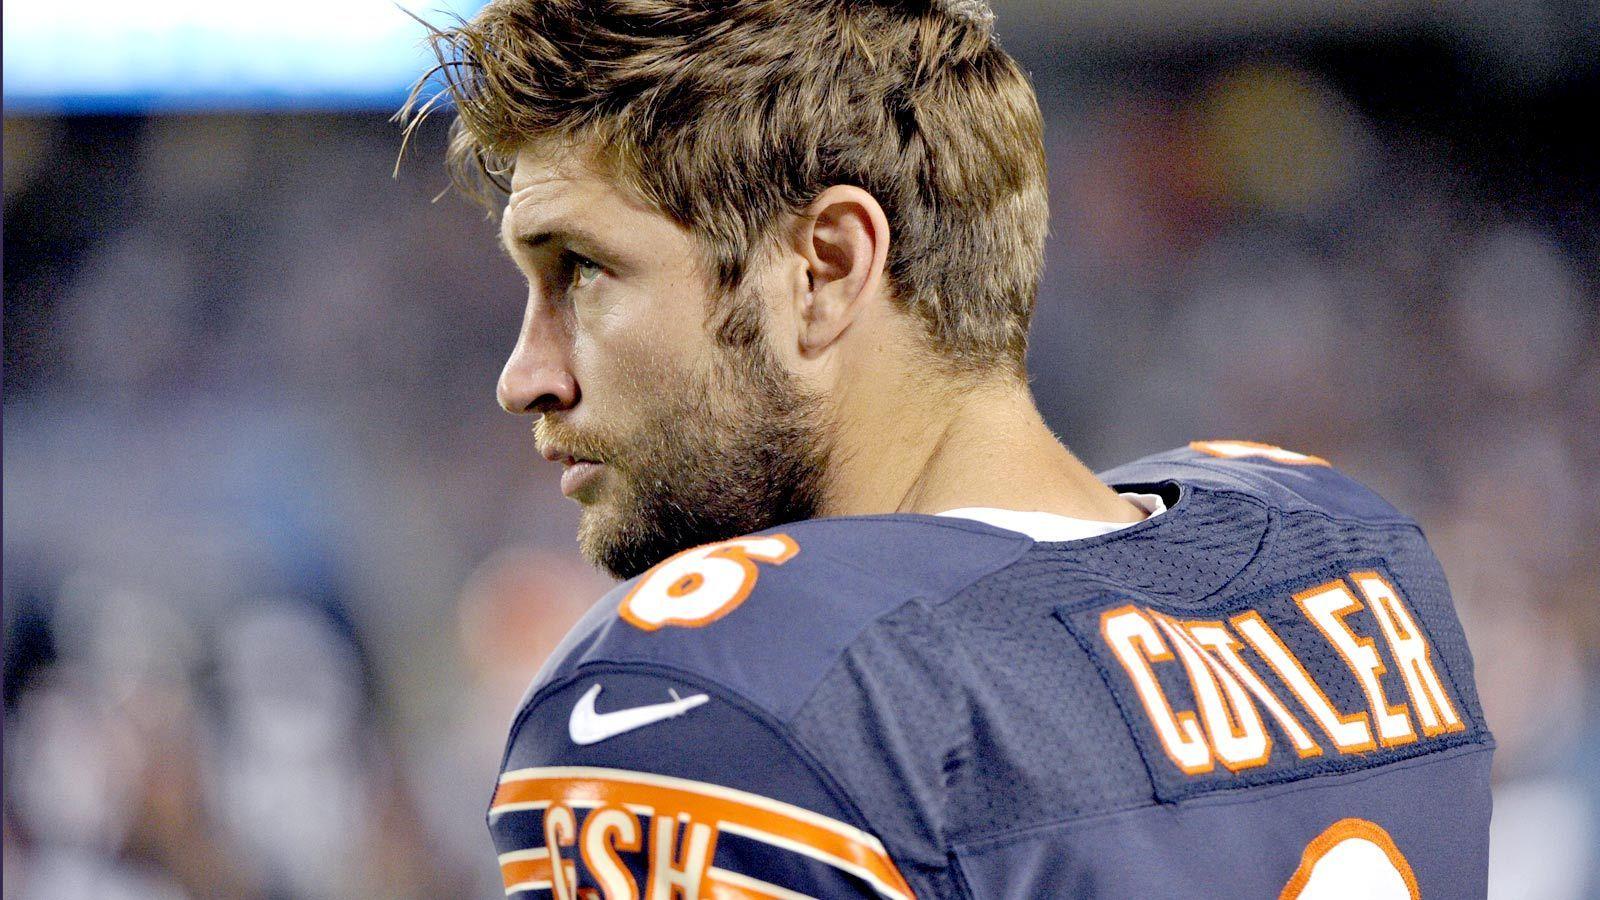 The Final Truth Of Chicago Bears Quarterback Jay Cutler